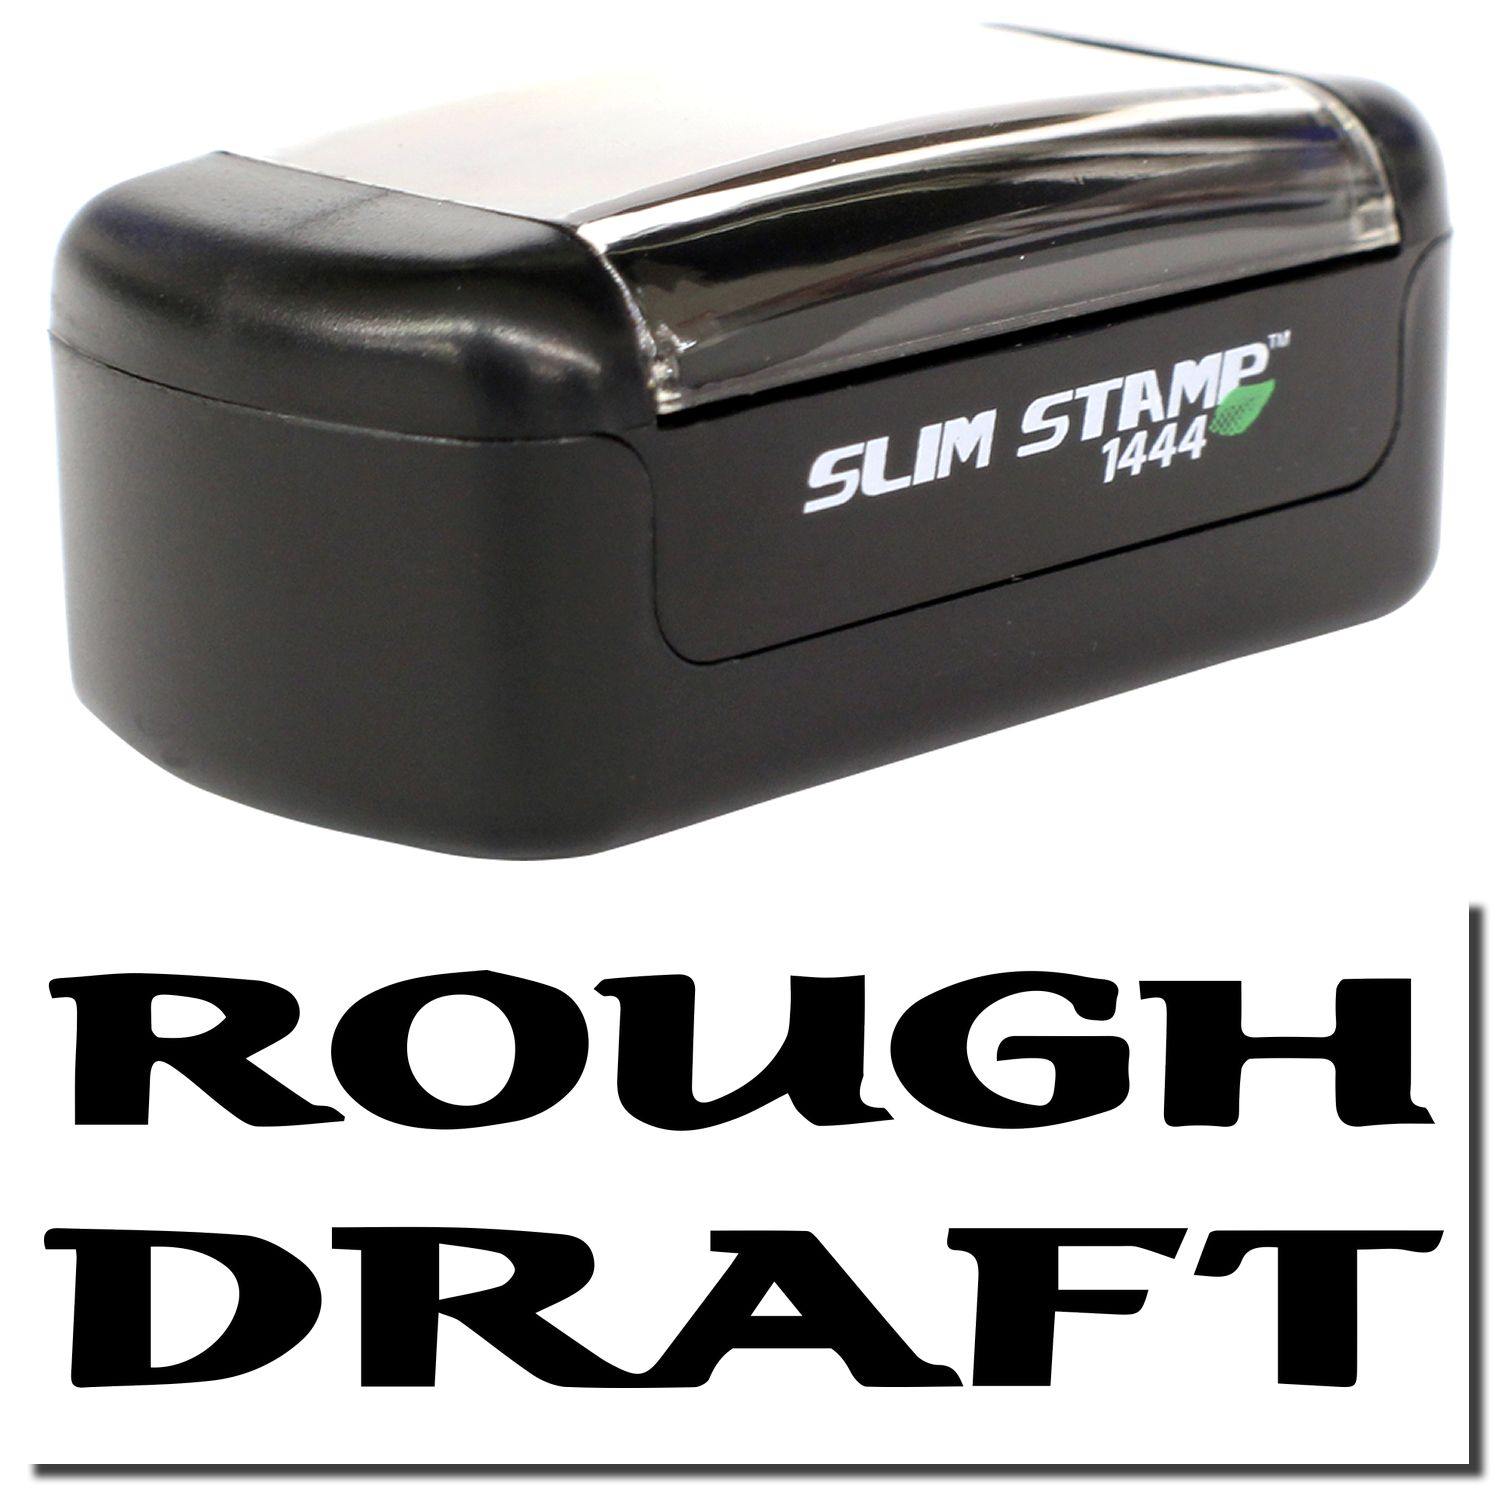 A stock office pre-inked stamp with a stamped image showing how the text "ROUGH DRAFT" in bold font is displayed after stamping.